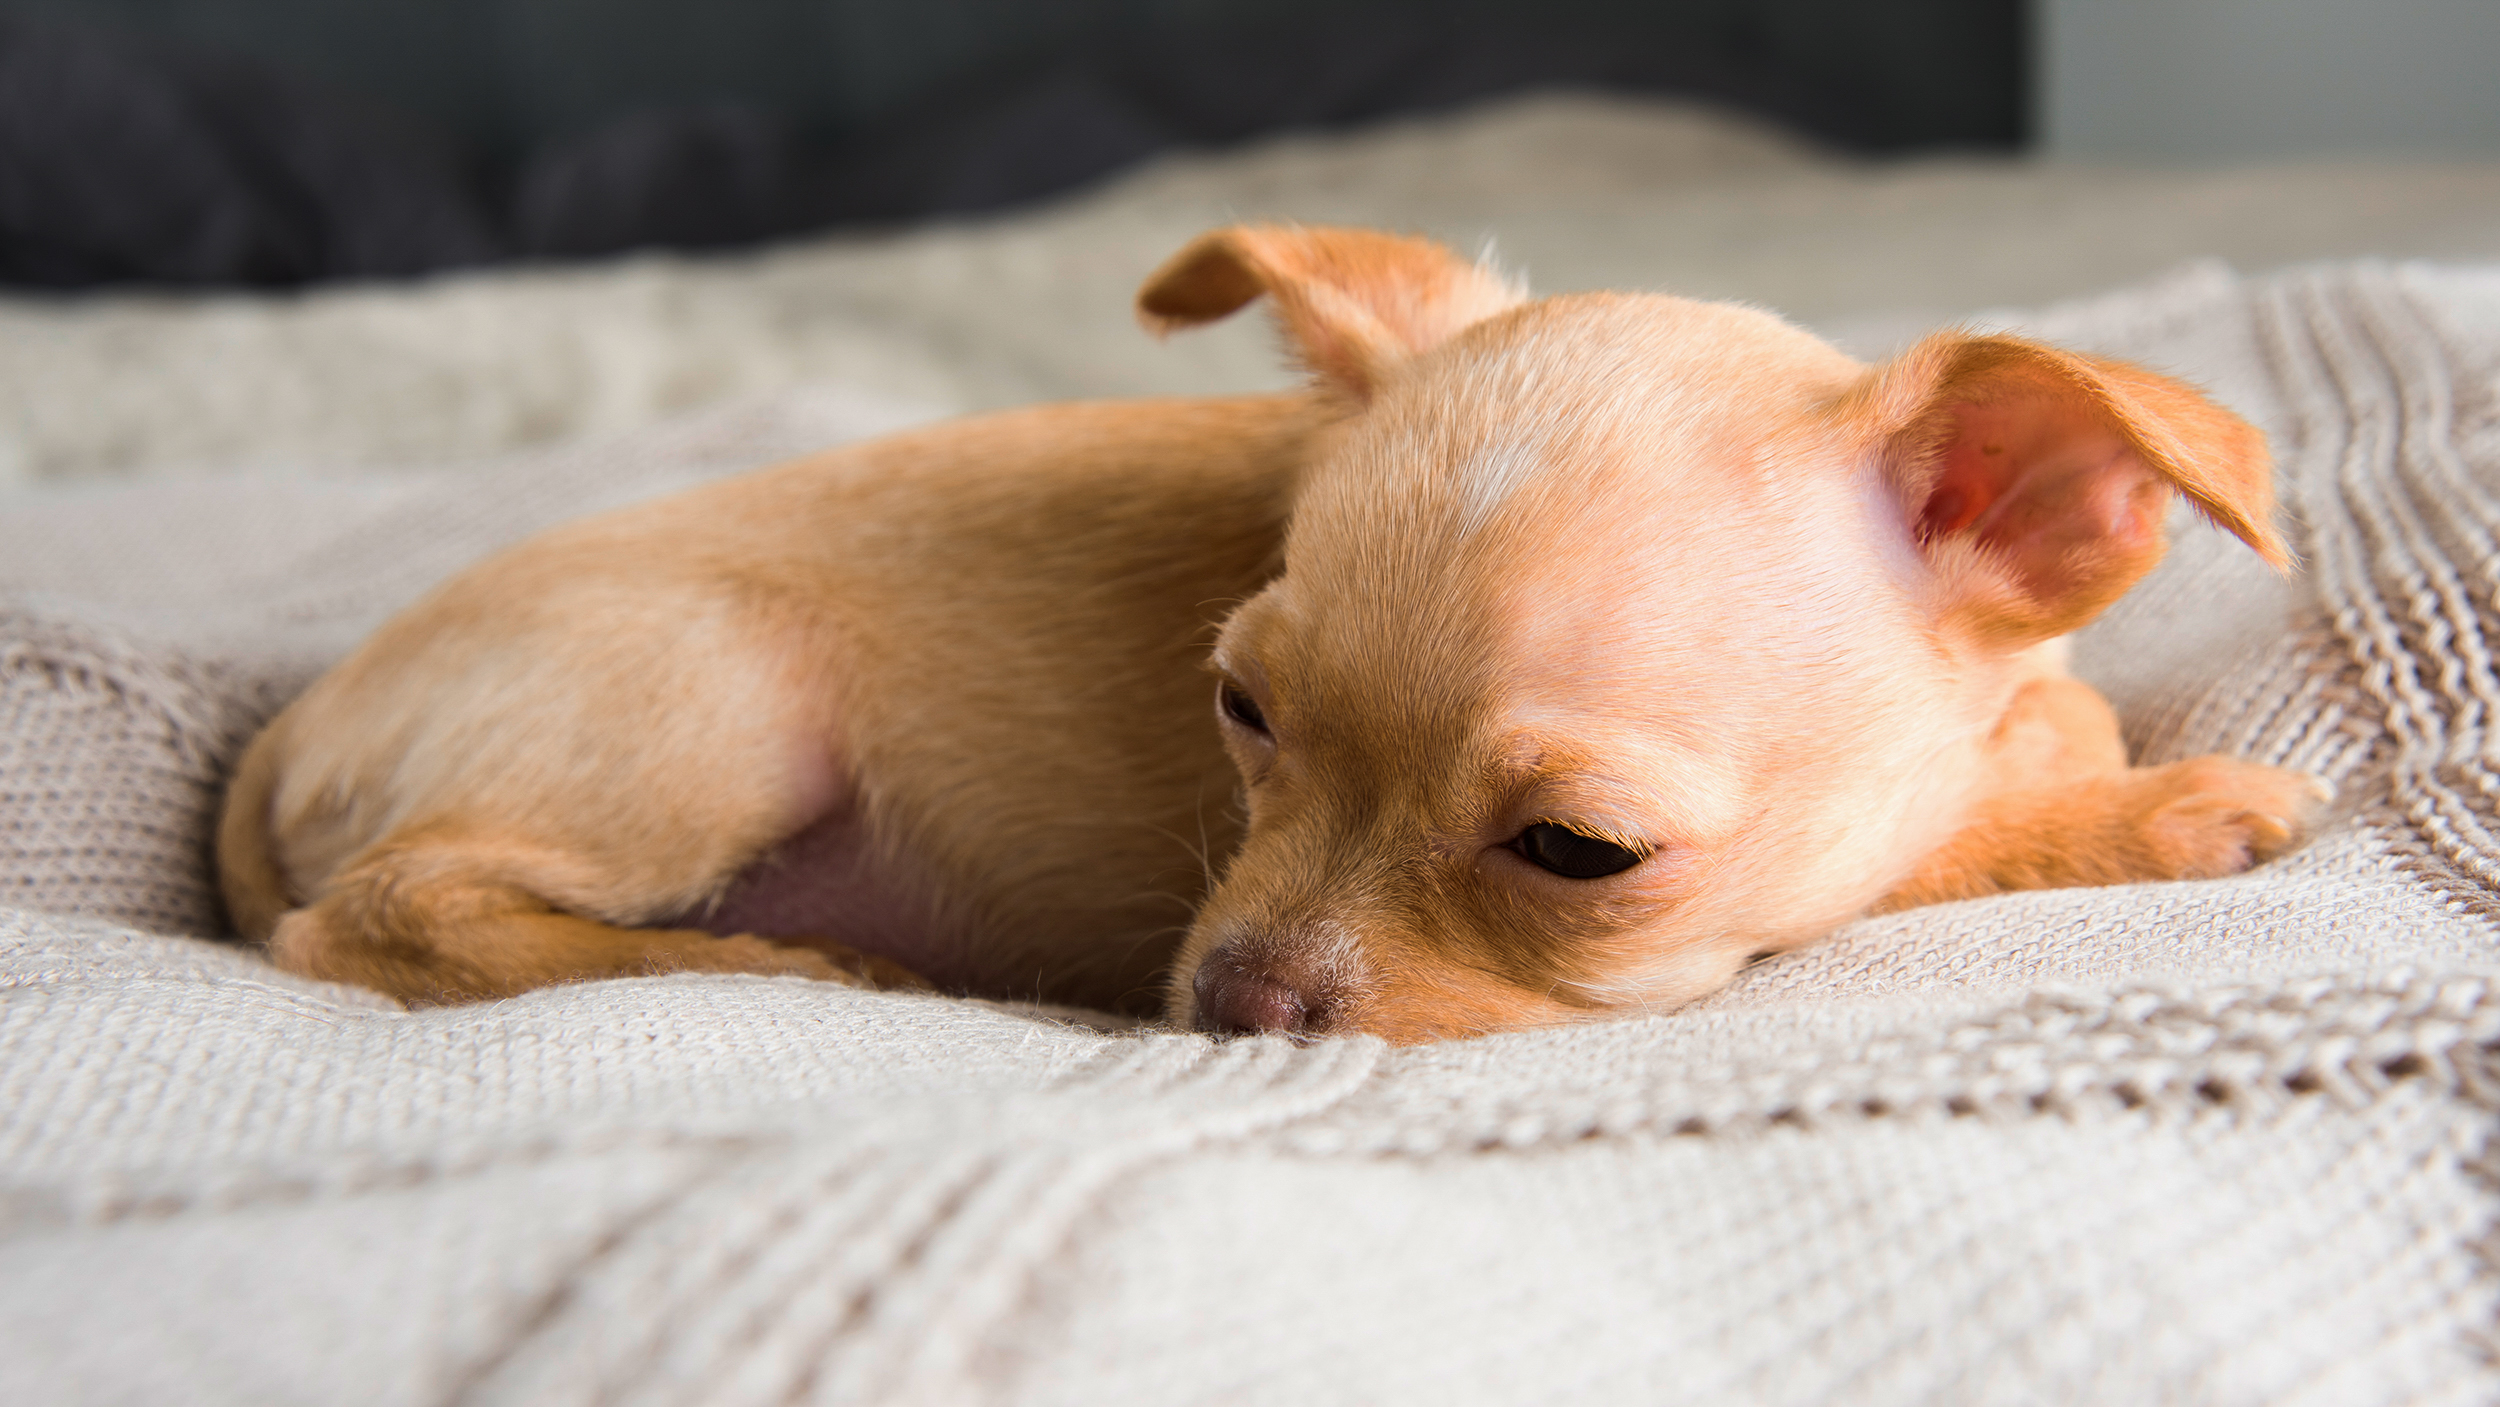 Puppy Chihuahua lying down on a blanket.